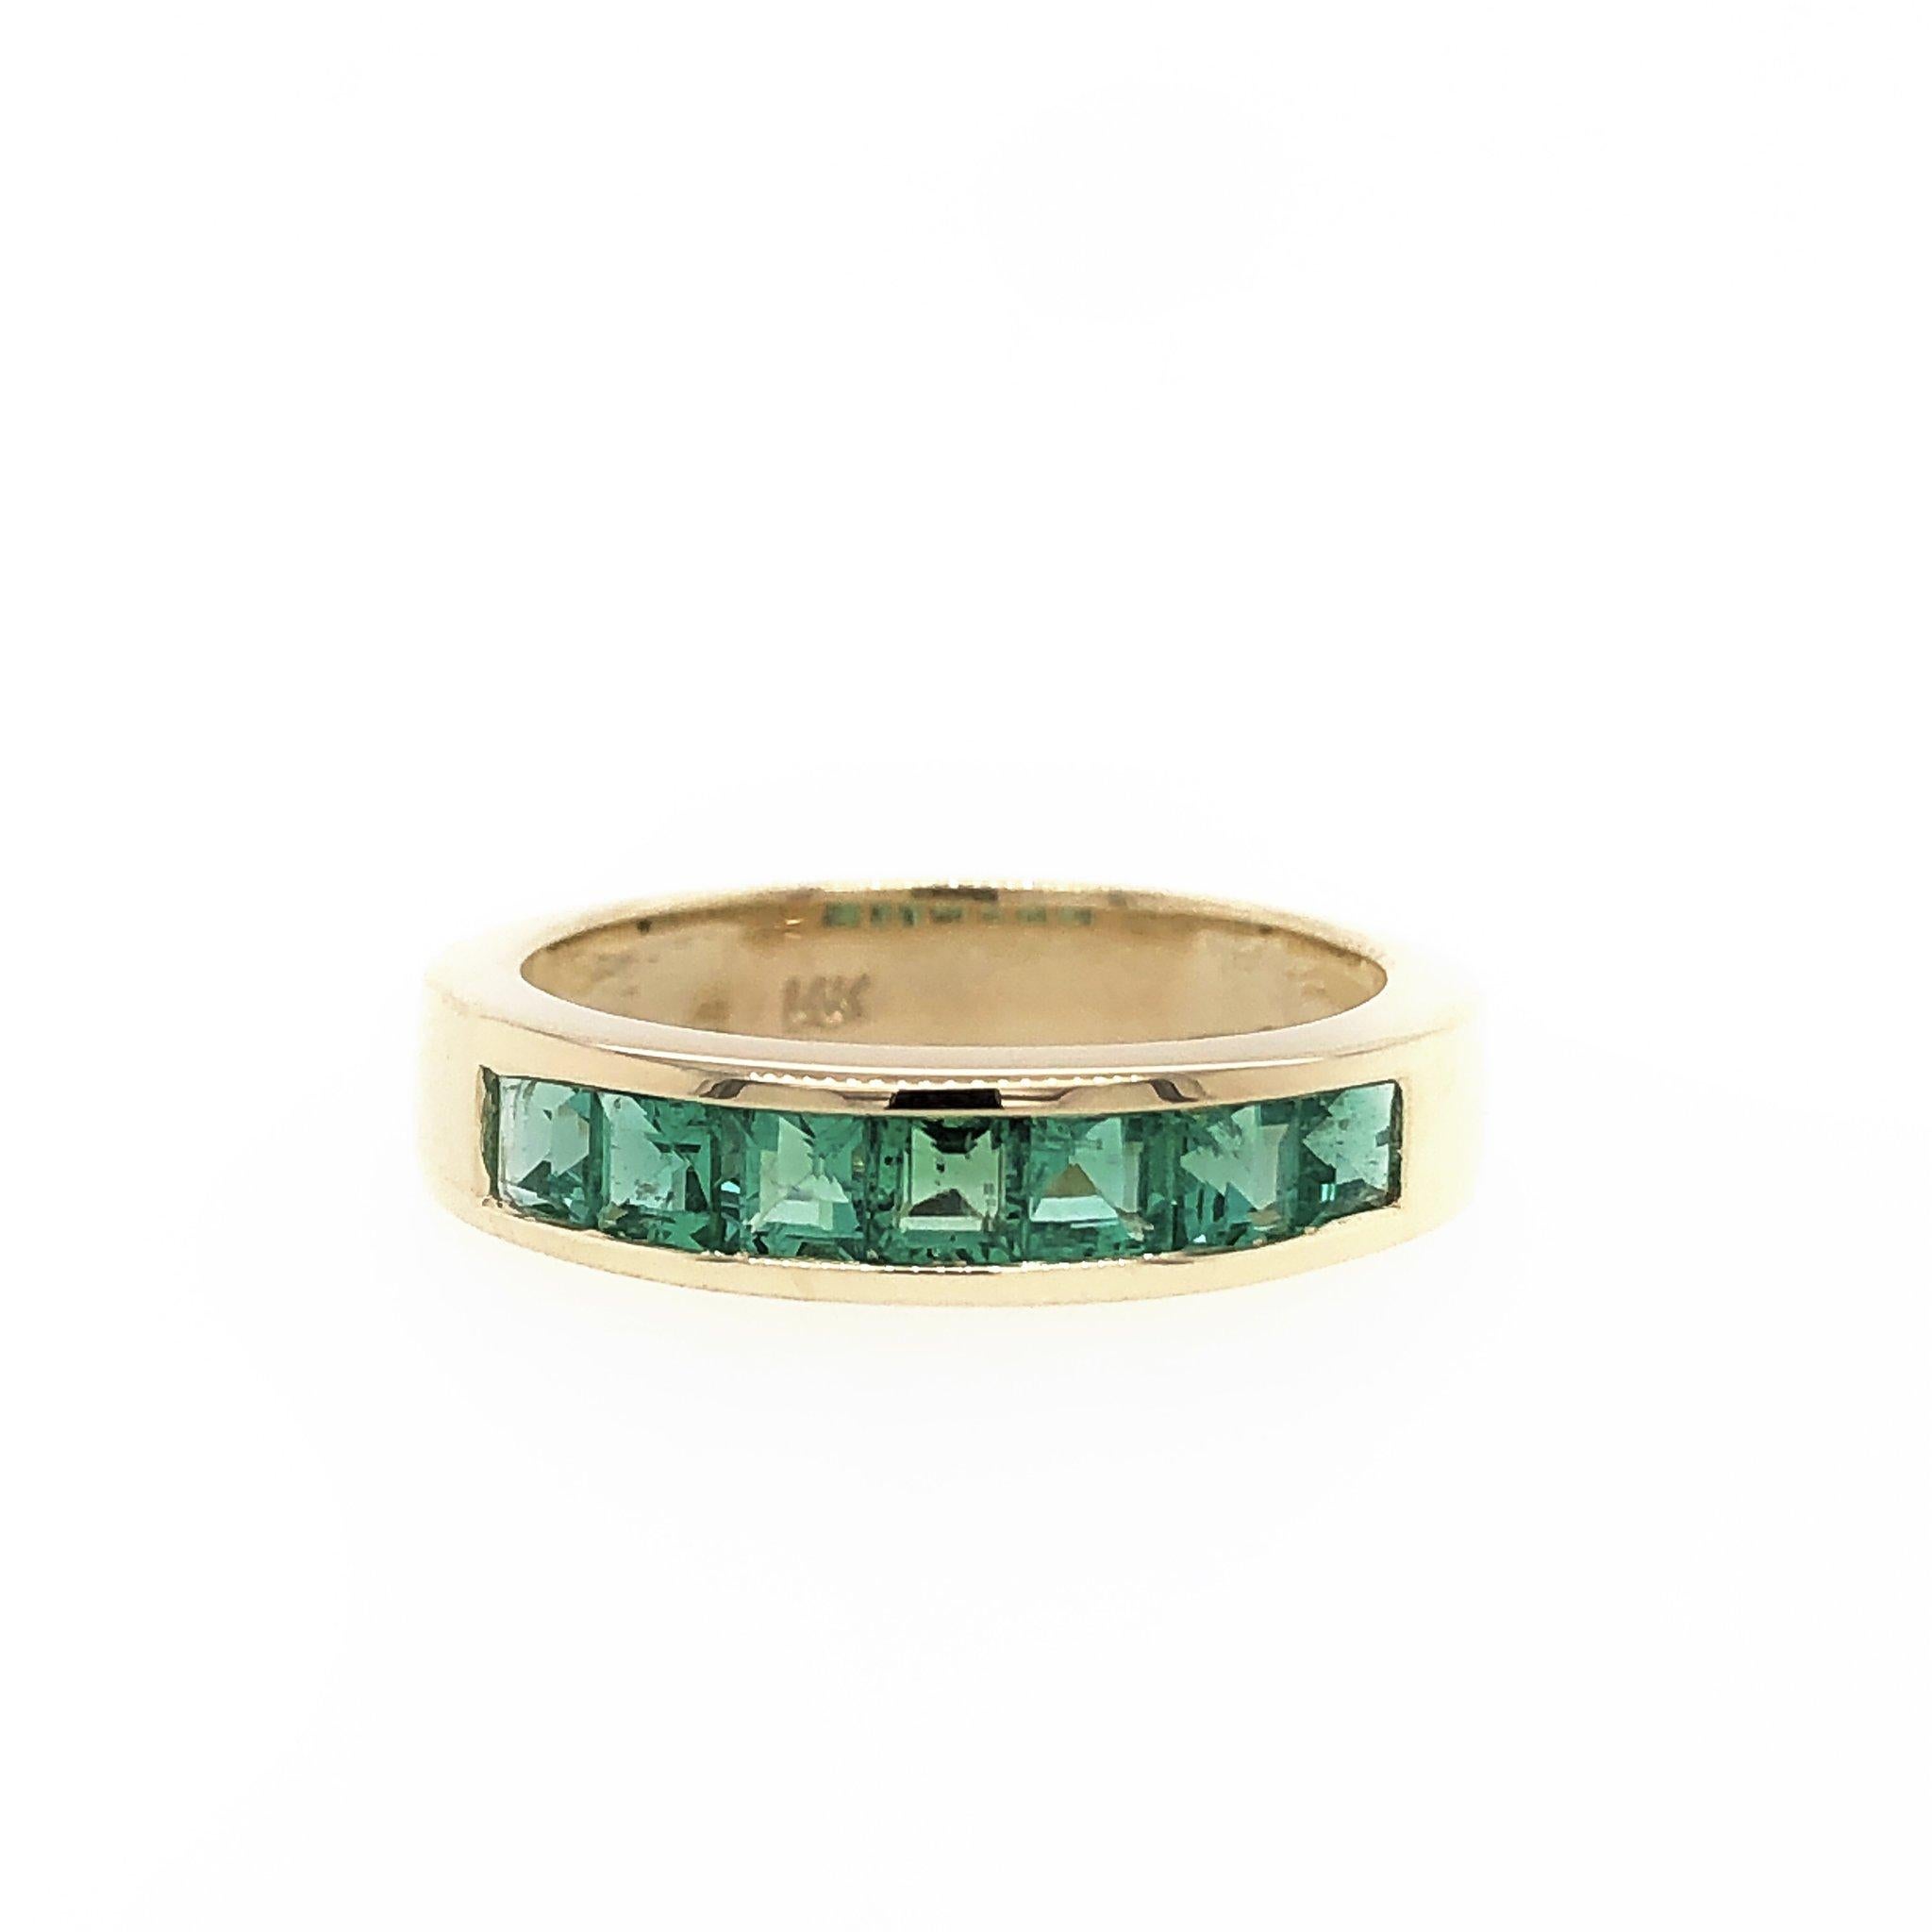 Clean and simple, this gorgeous channel set band ring is channel set with 7 green Emeralds which been carefully hand matched. Total carat weight: aprox. 0.81. Width of the ring is 4.23mm. Crafted in 14k yellow gold. Ring size 6. Weight: 4.30 grams.